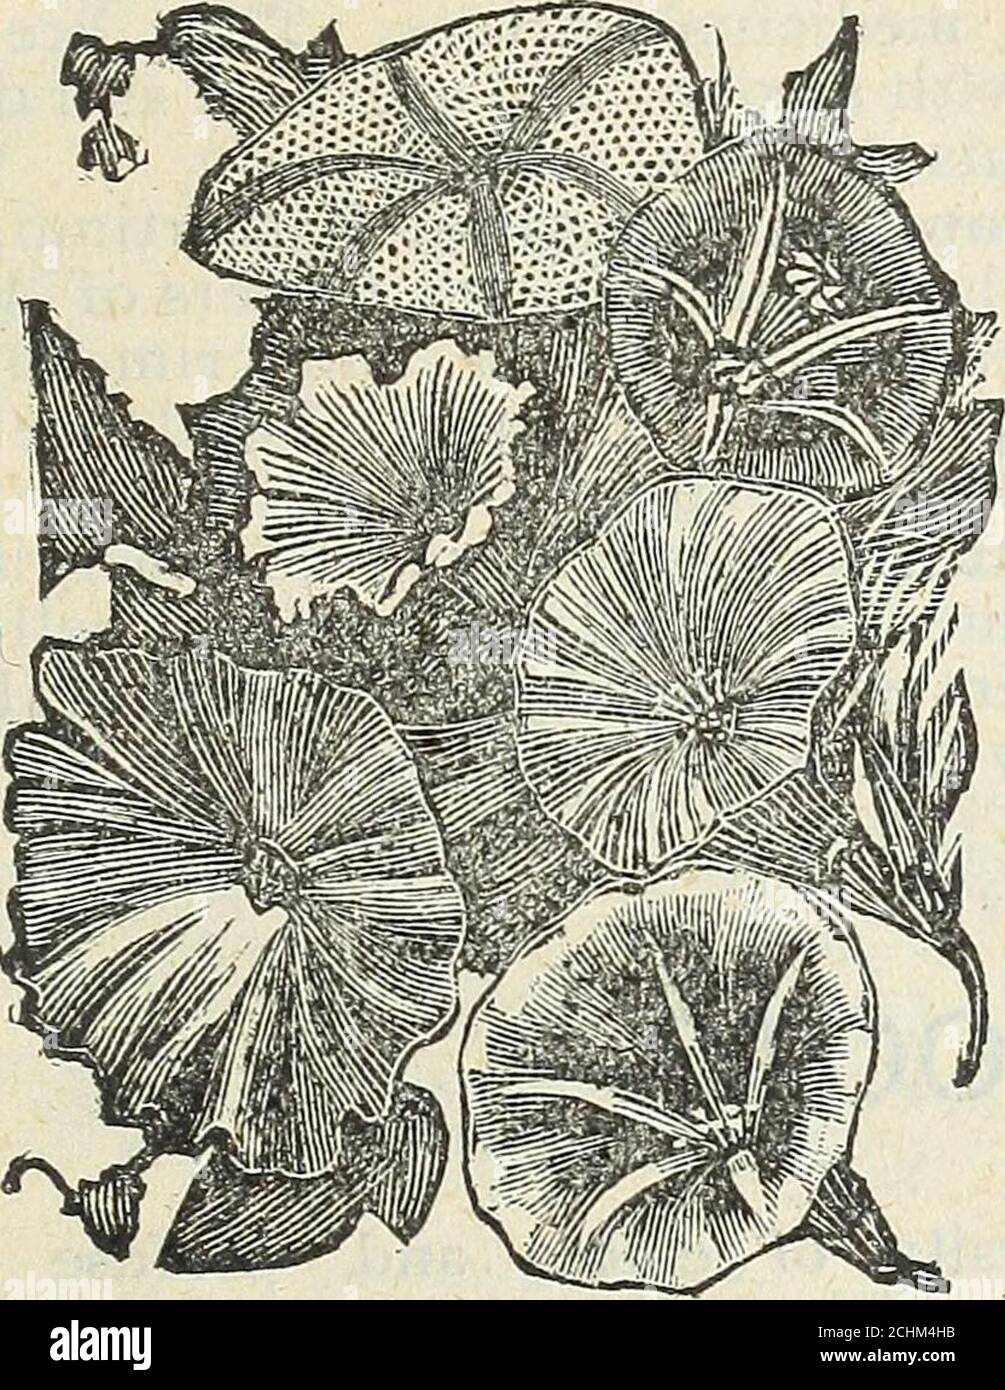 . Steckler's seed catalogue and garden manual for the southern states : 1901 . Maurandia Barclayana. Ipomsea Quamoclit rosea. Red Cy-press Vine. Very beautiful, delicate foli-age of rapid growth, with scarlet star-shaped flowers. Ipomsea Quamoclit alba. White Cy-press Vine. The same as the Red variety. I/athyrus odoratus. Sweet Peas. Beau-tiful flowers of all colors, very showy.Good for cut flowers. Six feet high. De-cember till April. Jty. fi JJS9+JU ,GARDEN MANUAL FOR THE SOUTHERN STATES. 119 Maurandia Barclay ana. Mixed Mau-randia. A slender growing vine of rapidgrowth. Rose, purple and wh Stock Photo